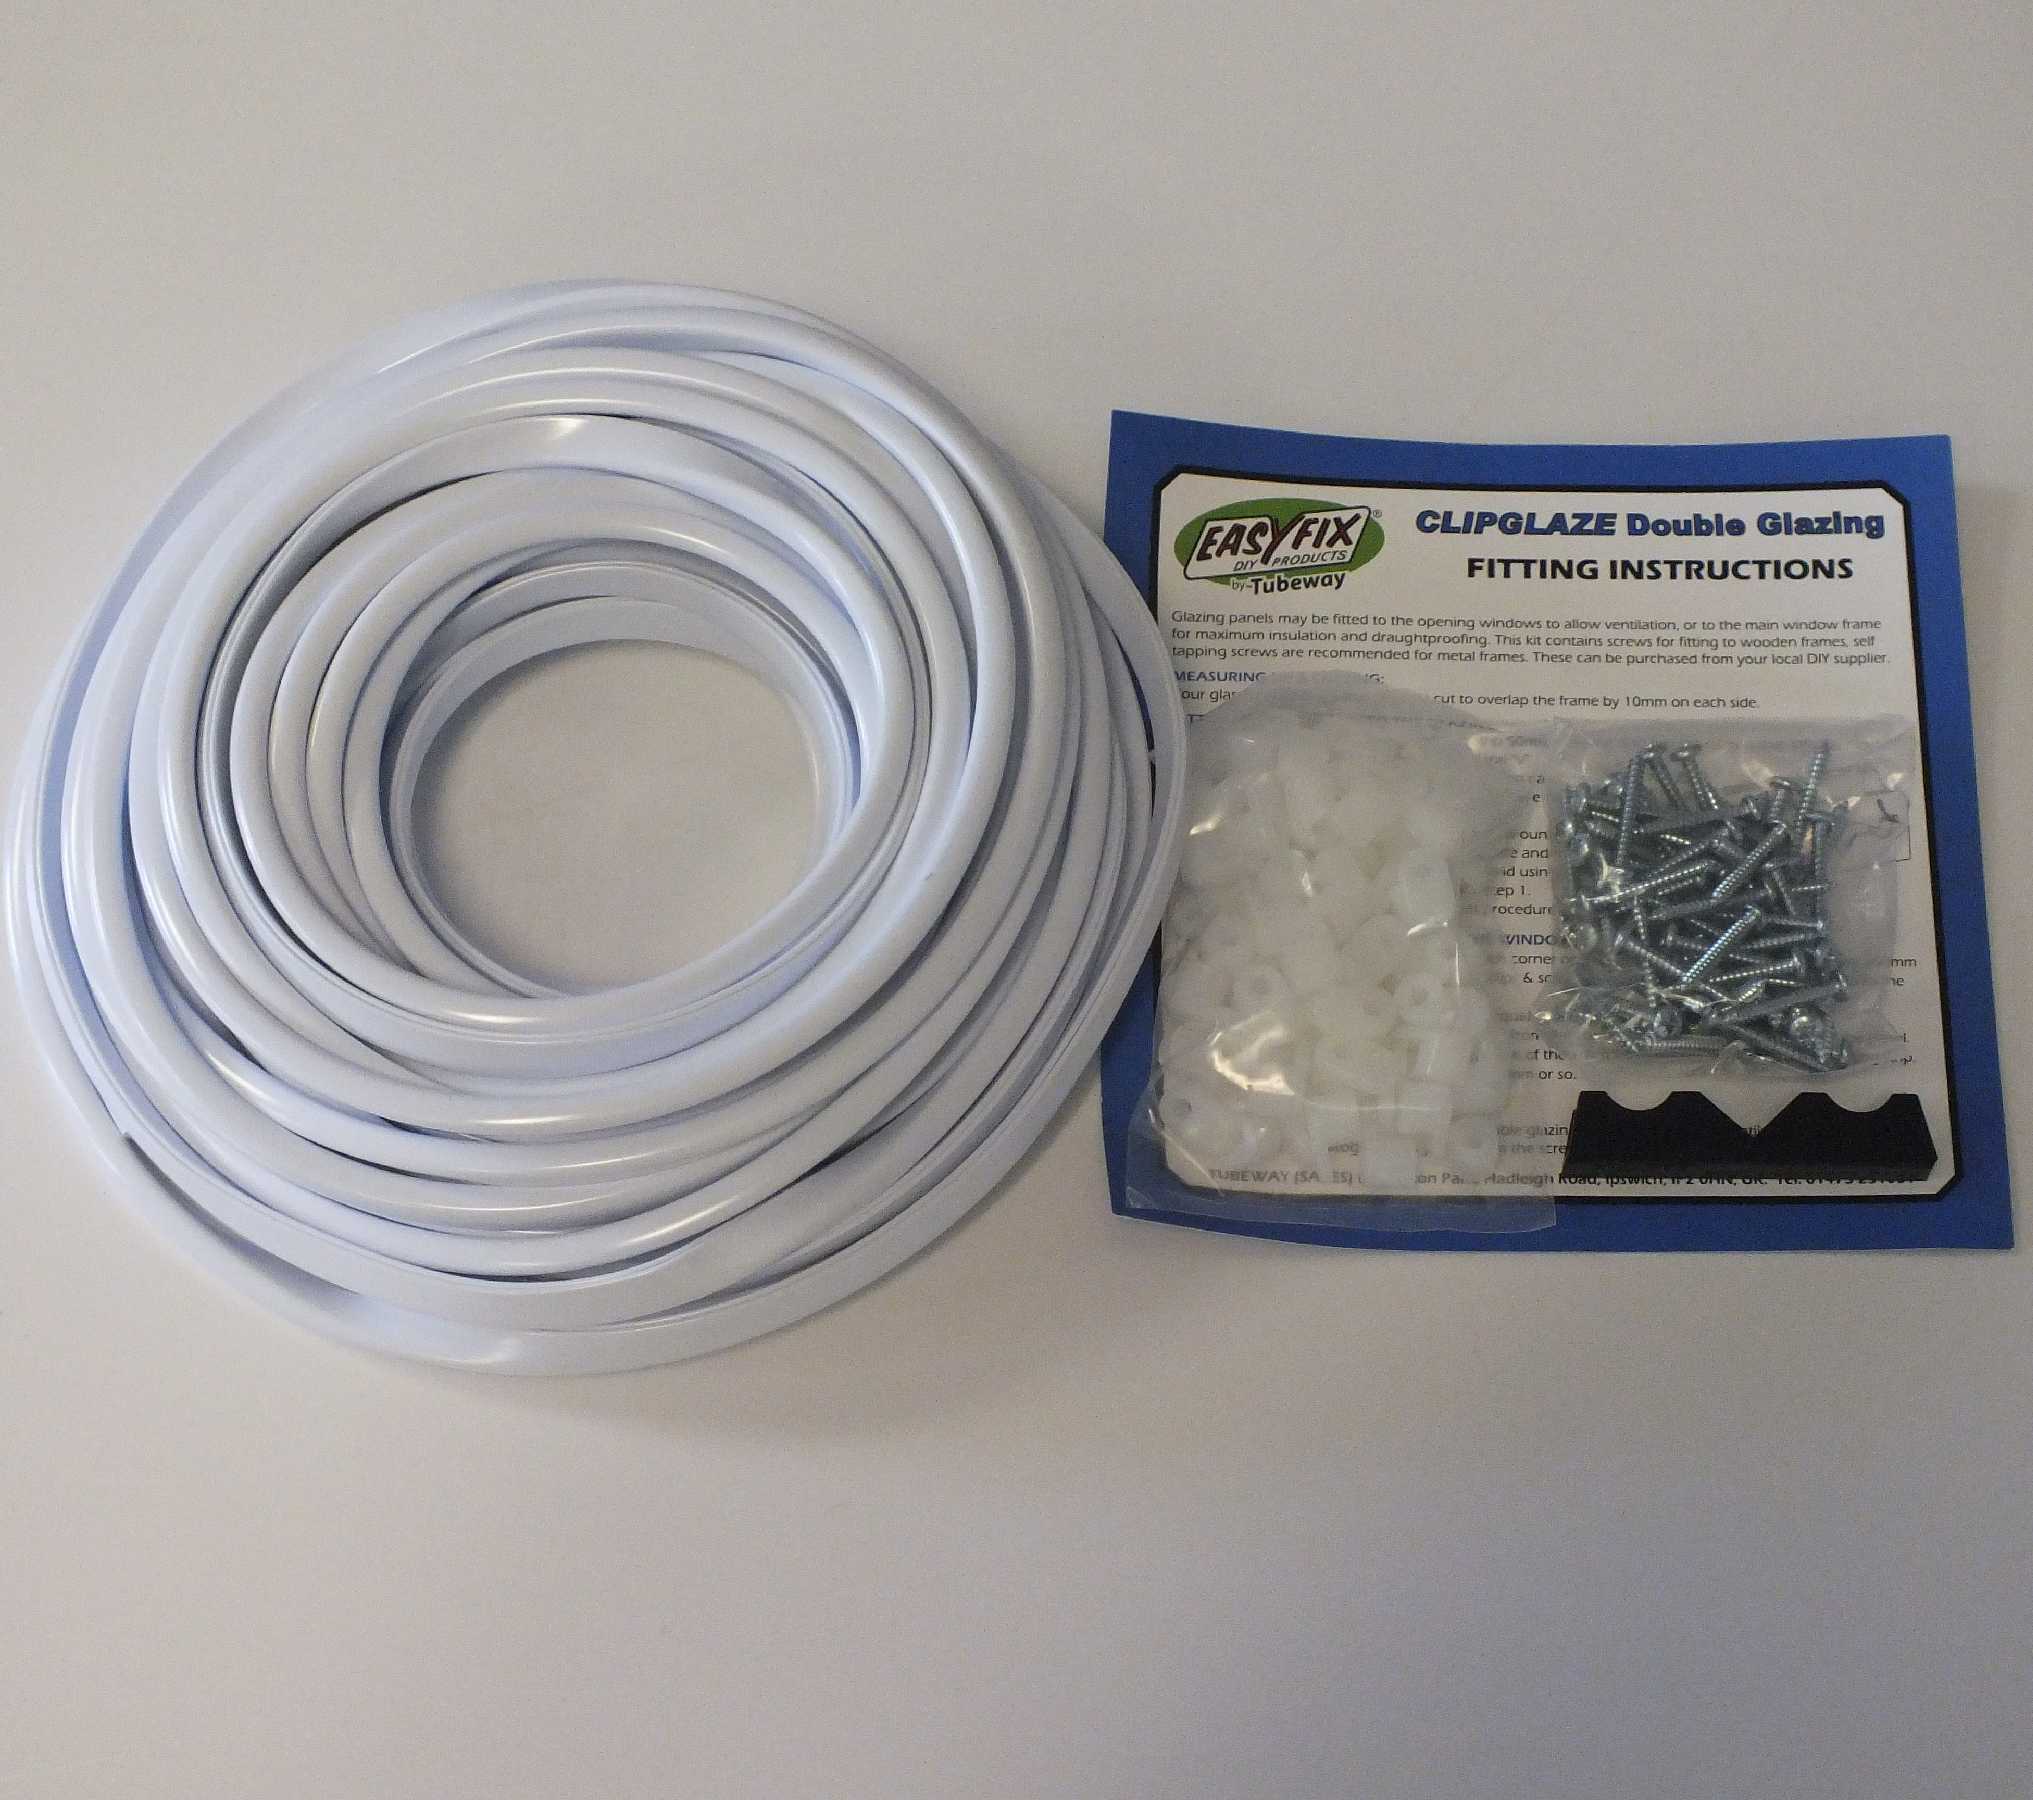 Easyfix Clipglaze Edging Kit - 15m roll of edging for 2mm Glazing Thickness, White, Clear or Brown